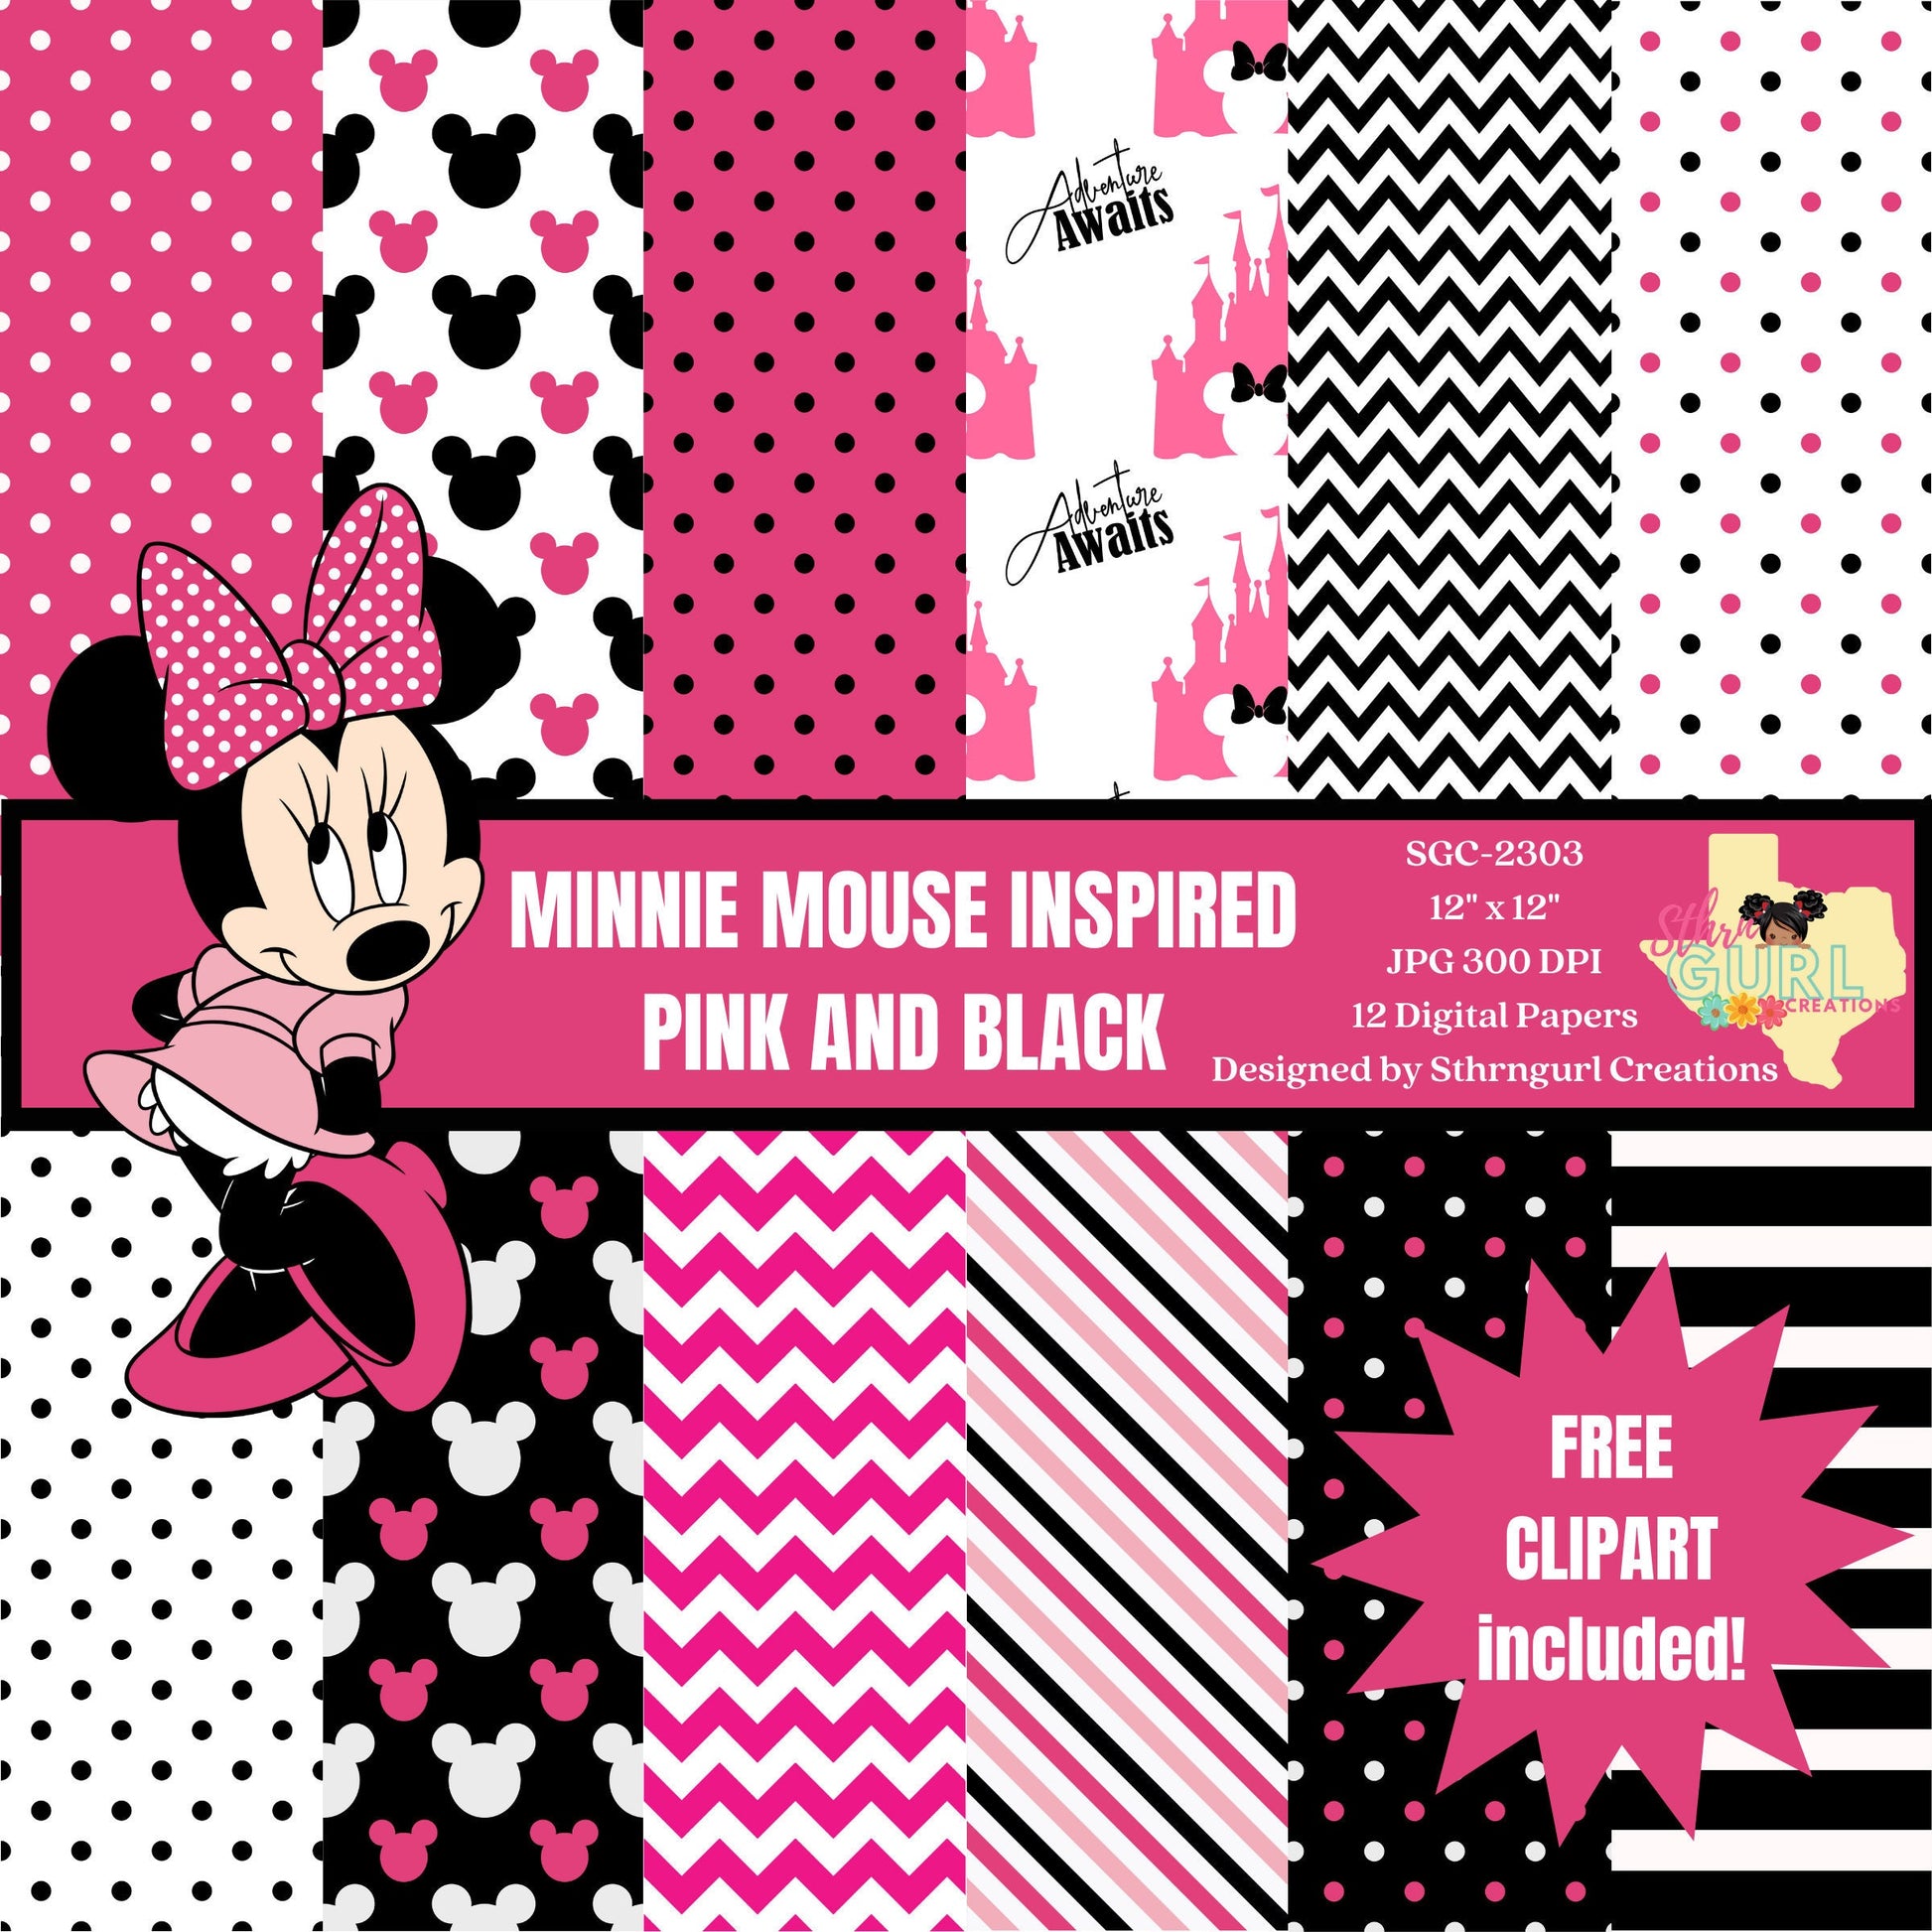 Pattern Of White Polka Dots On Red Minnie Mouse Paper Royalty-Free